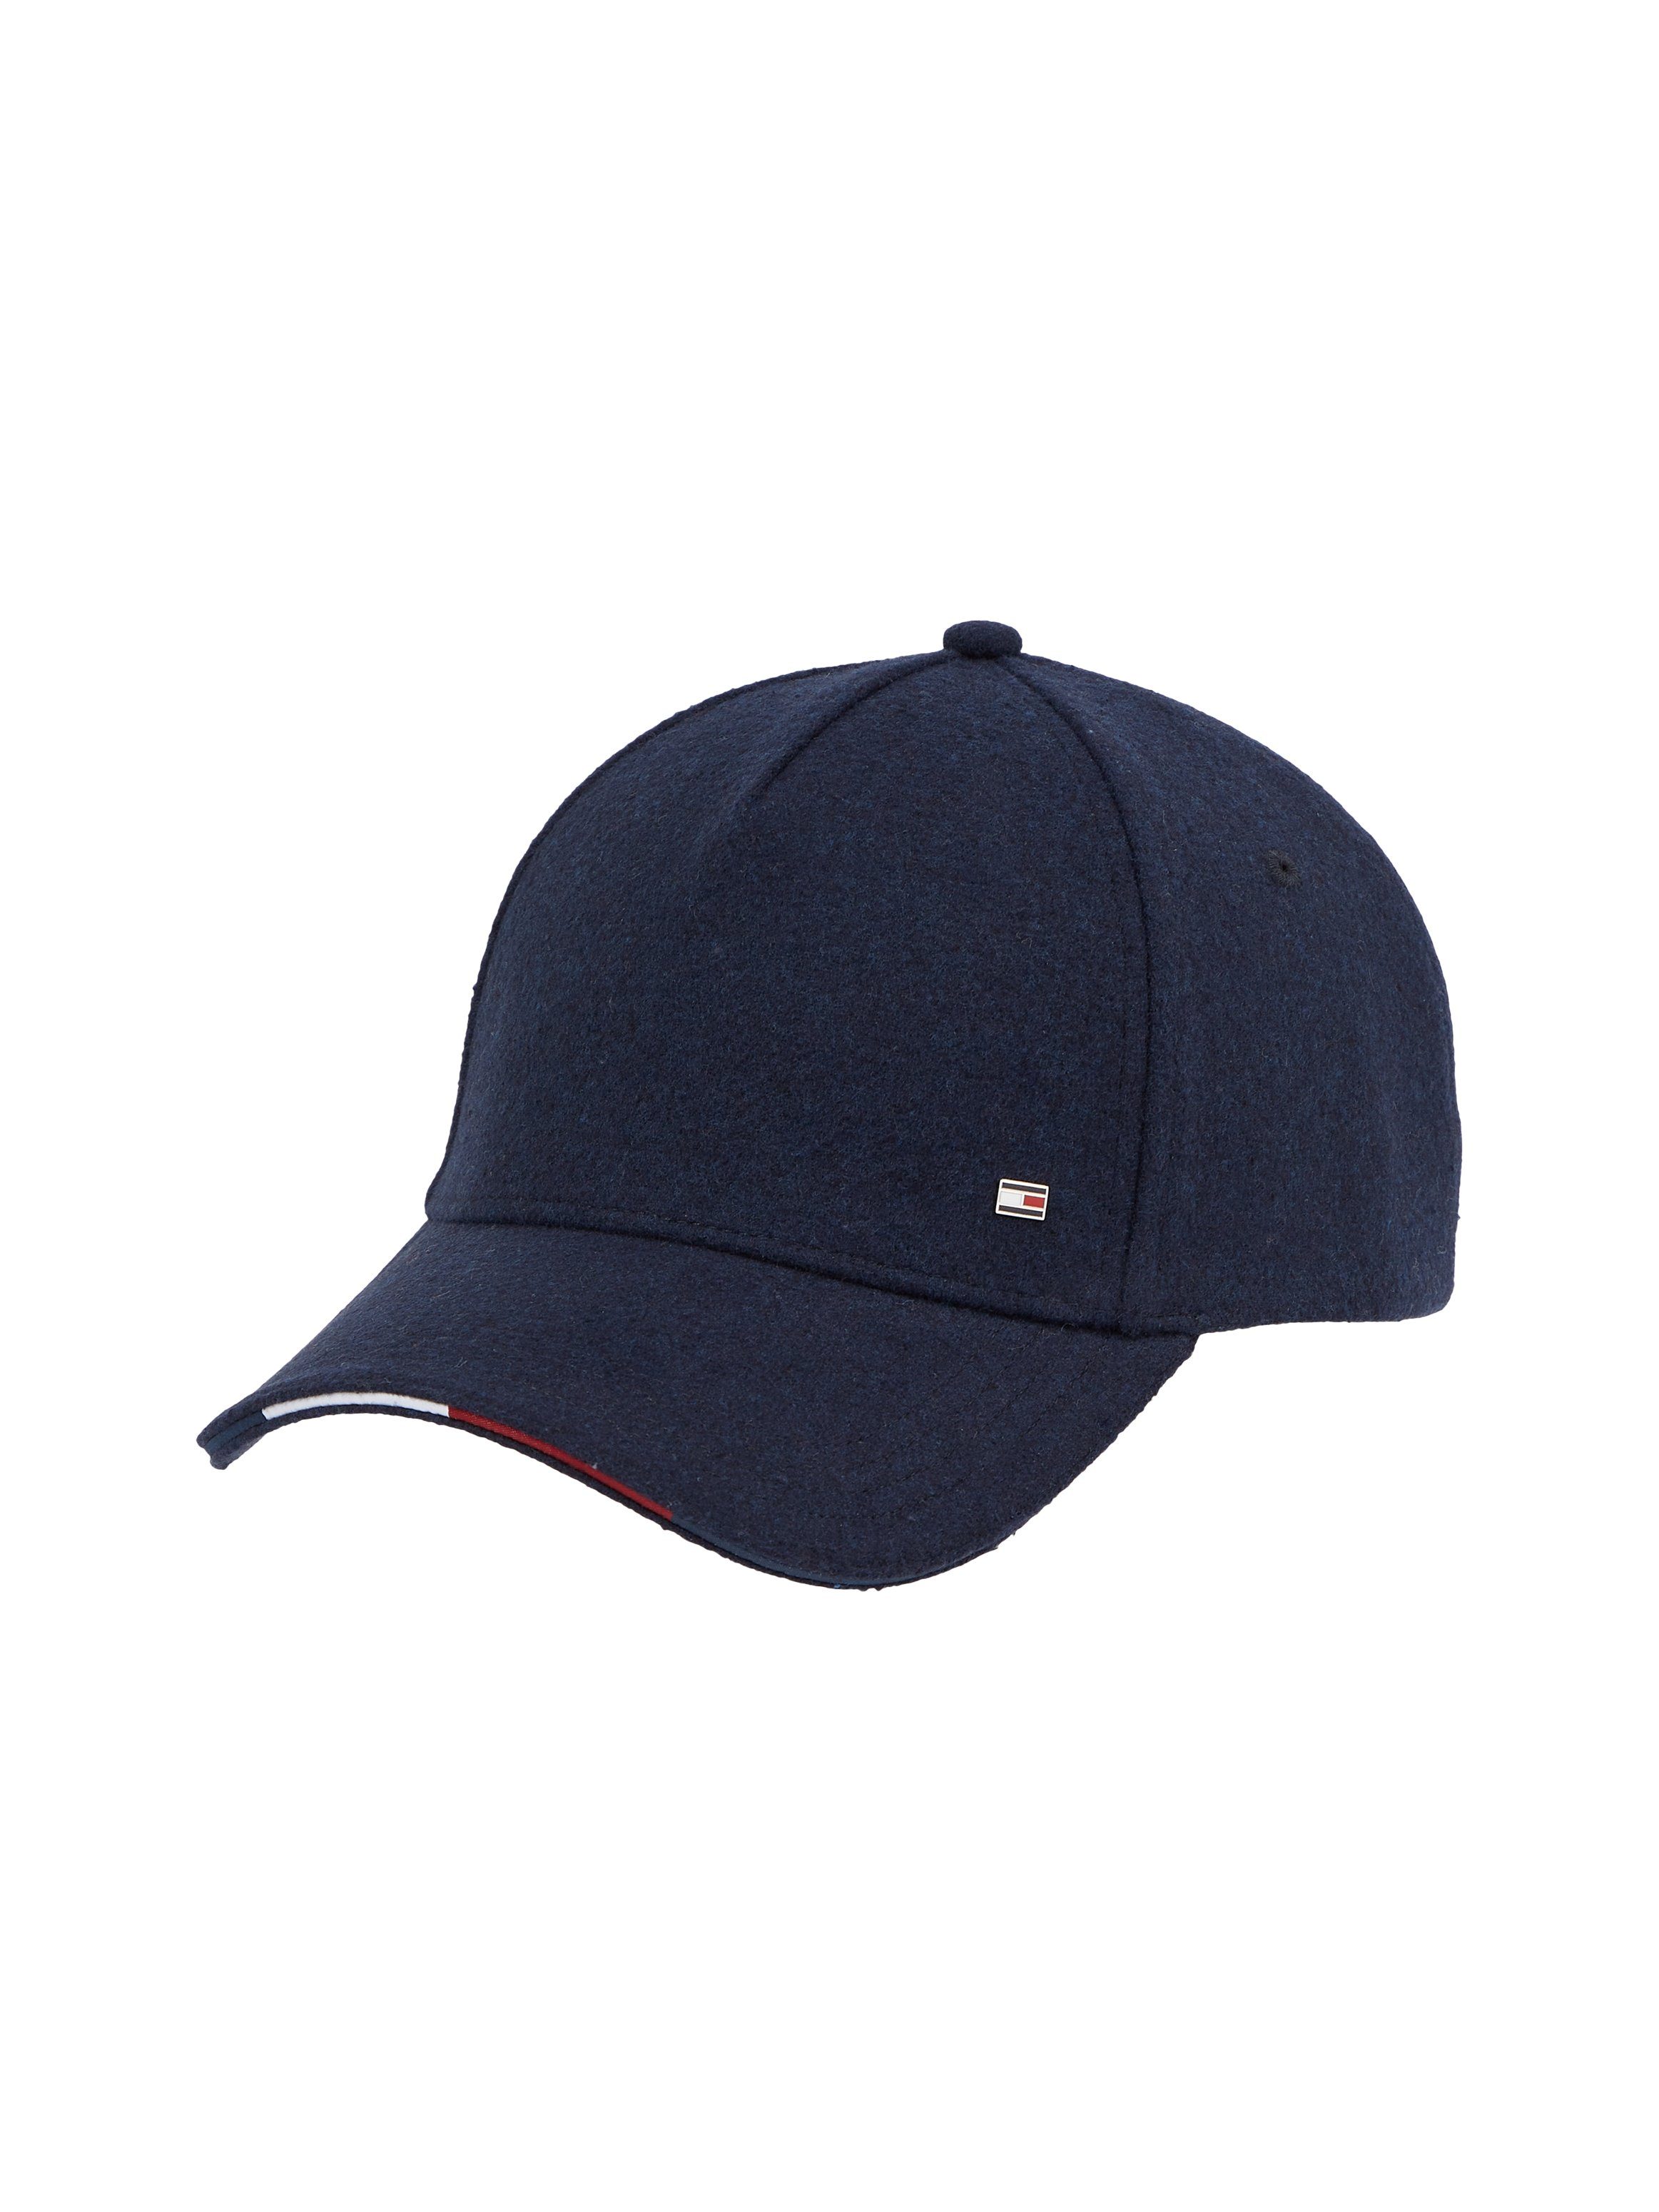 und Space Tommy Cap CAP Baseball Blue CORPORATE Hilfiger mit ELEVATED Flag Tommy-Tape